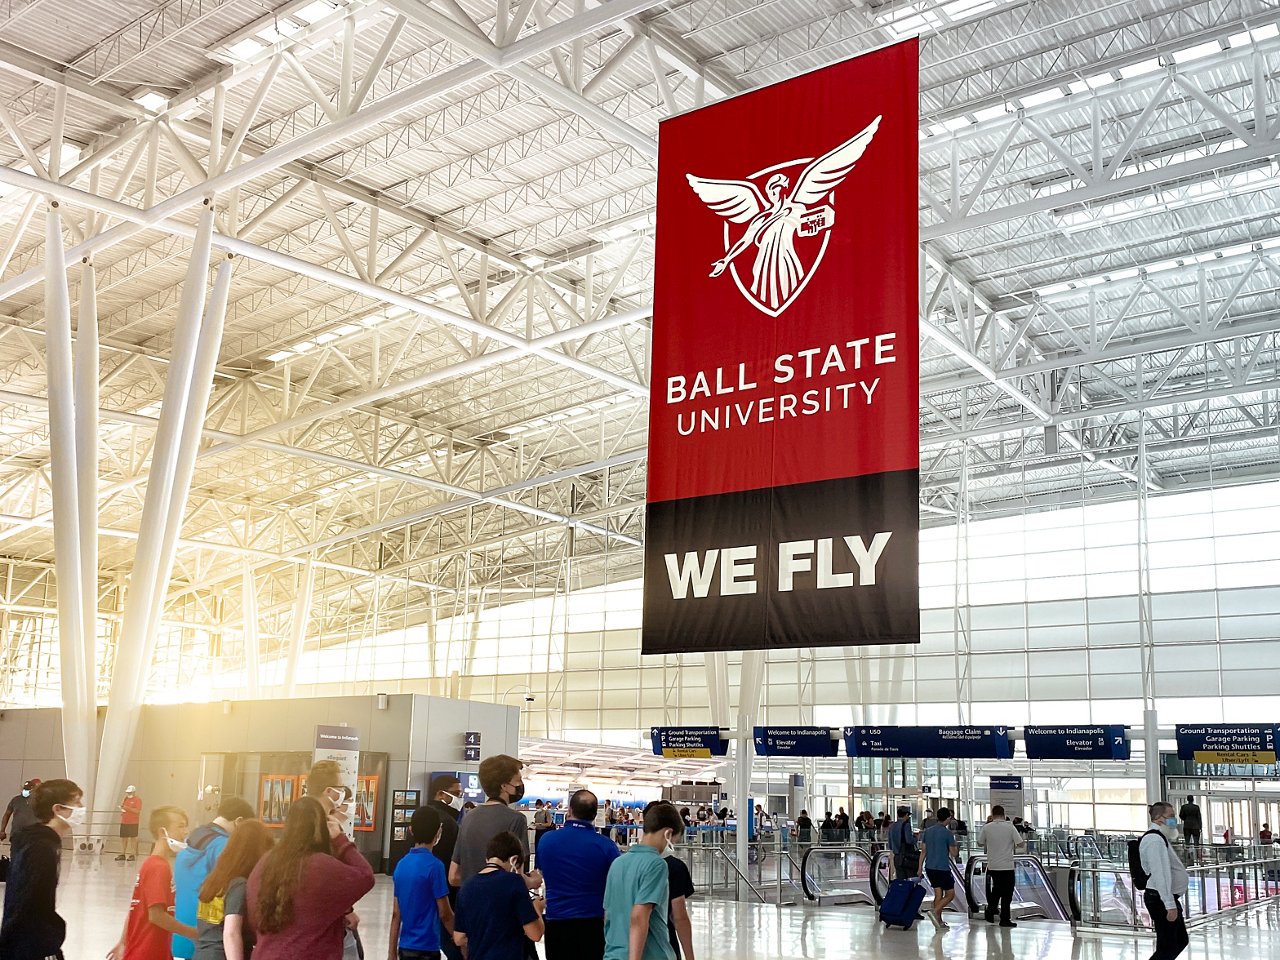 Lamar Advertising and Ball State University “We Fly” hanging banner in airport